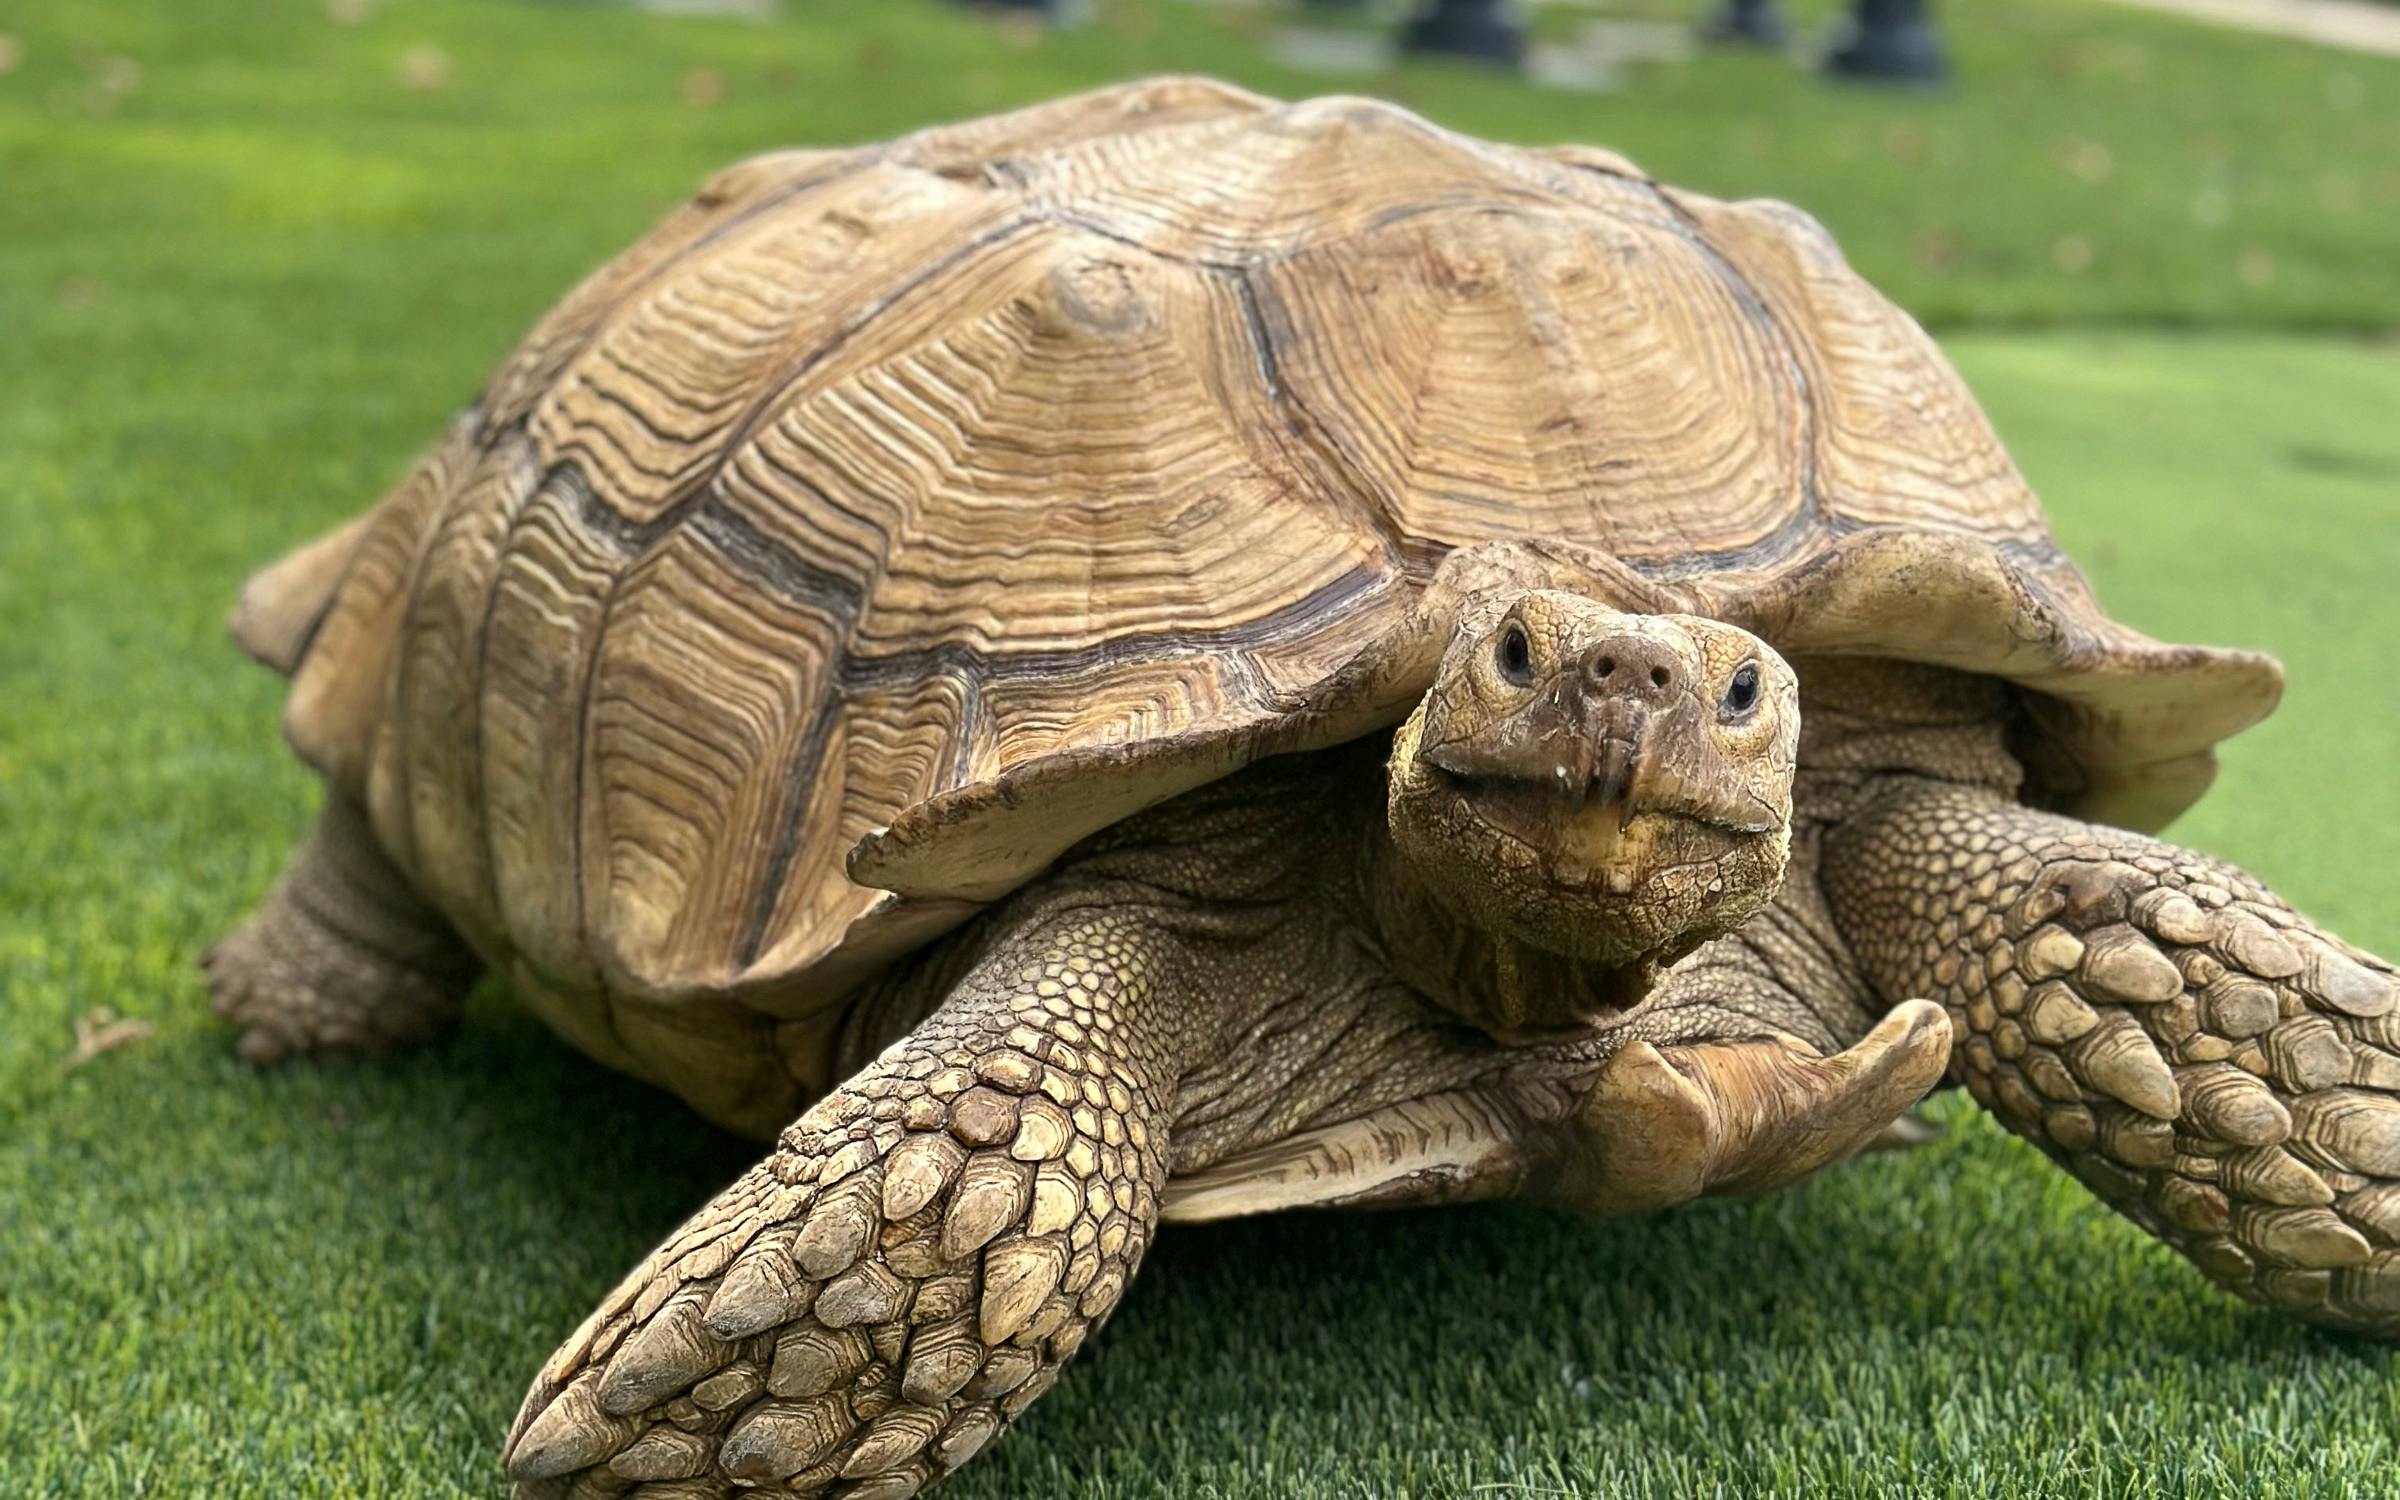 A wide variety of materials have been used to imitate tortoise